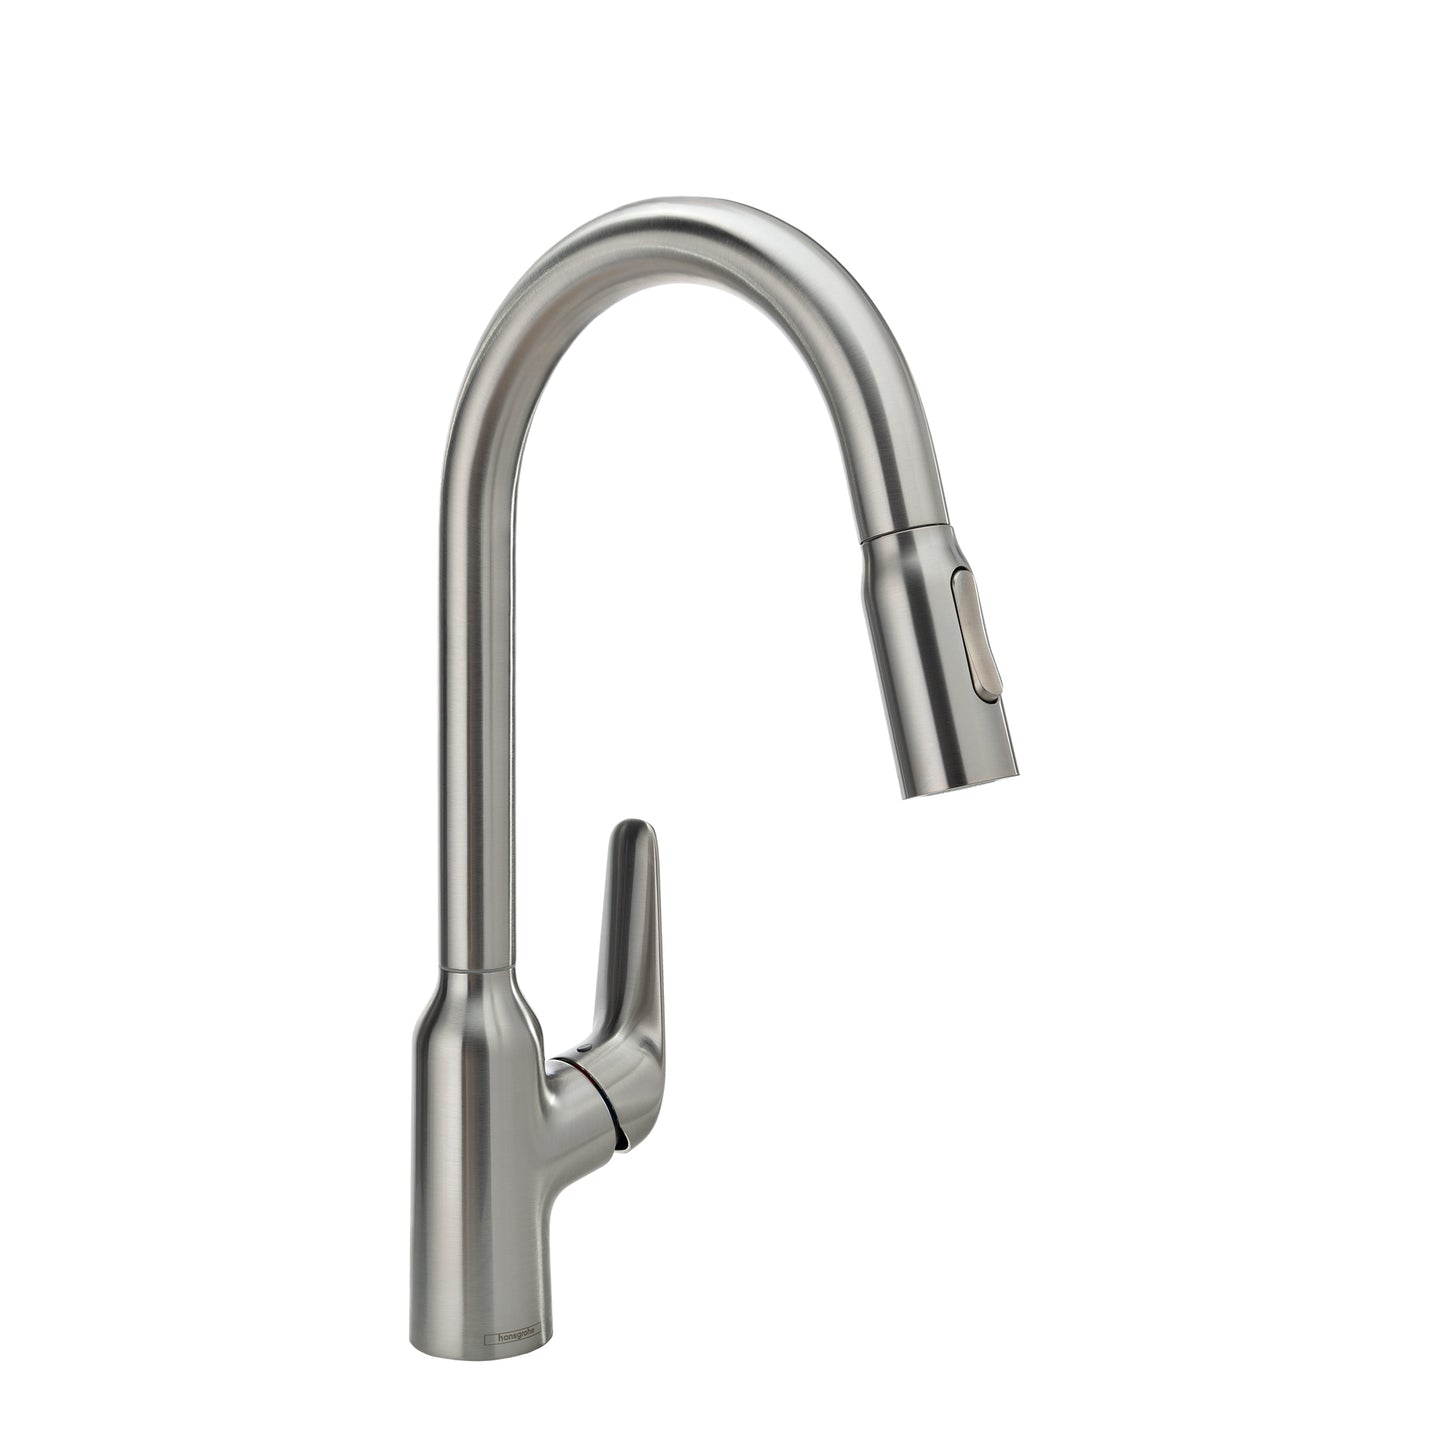 HANSGROHE 71800801 Stainless Steel Optic Focus N Modern Kitchen Faucet 1.75 GPM